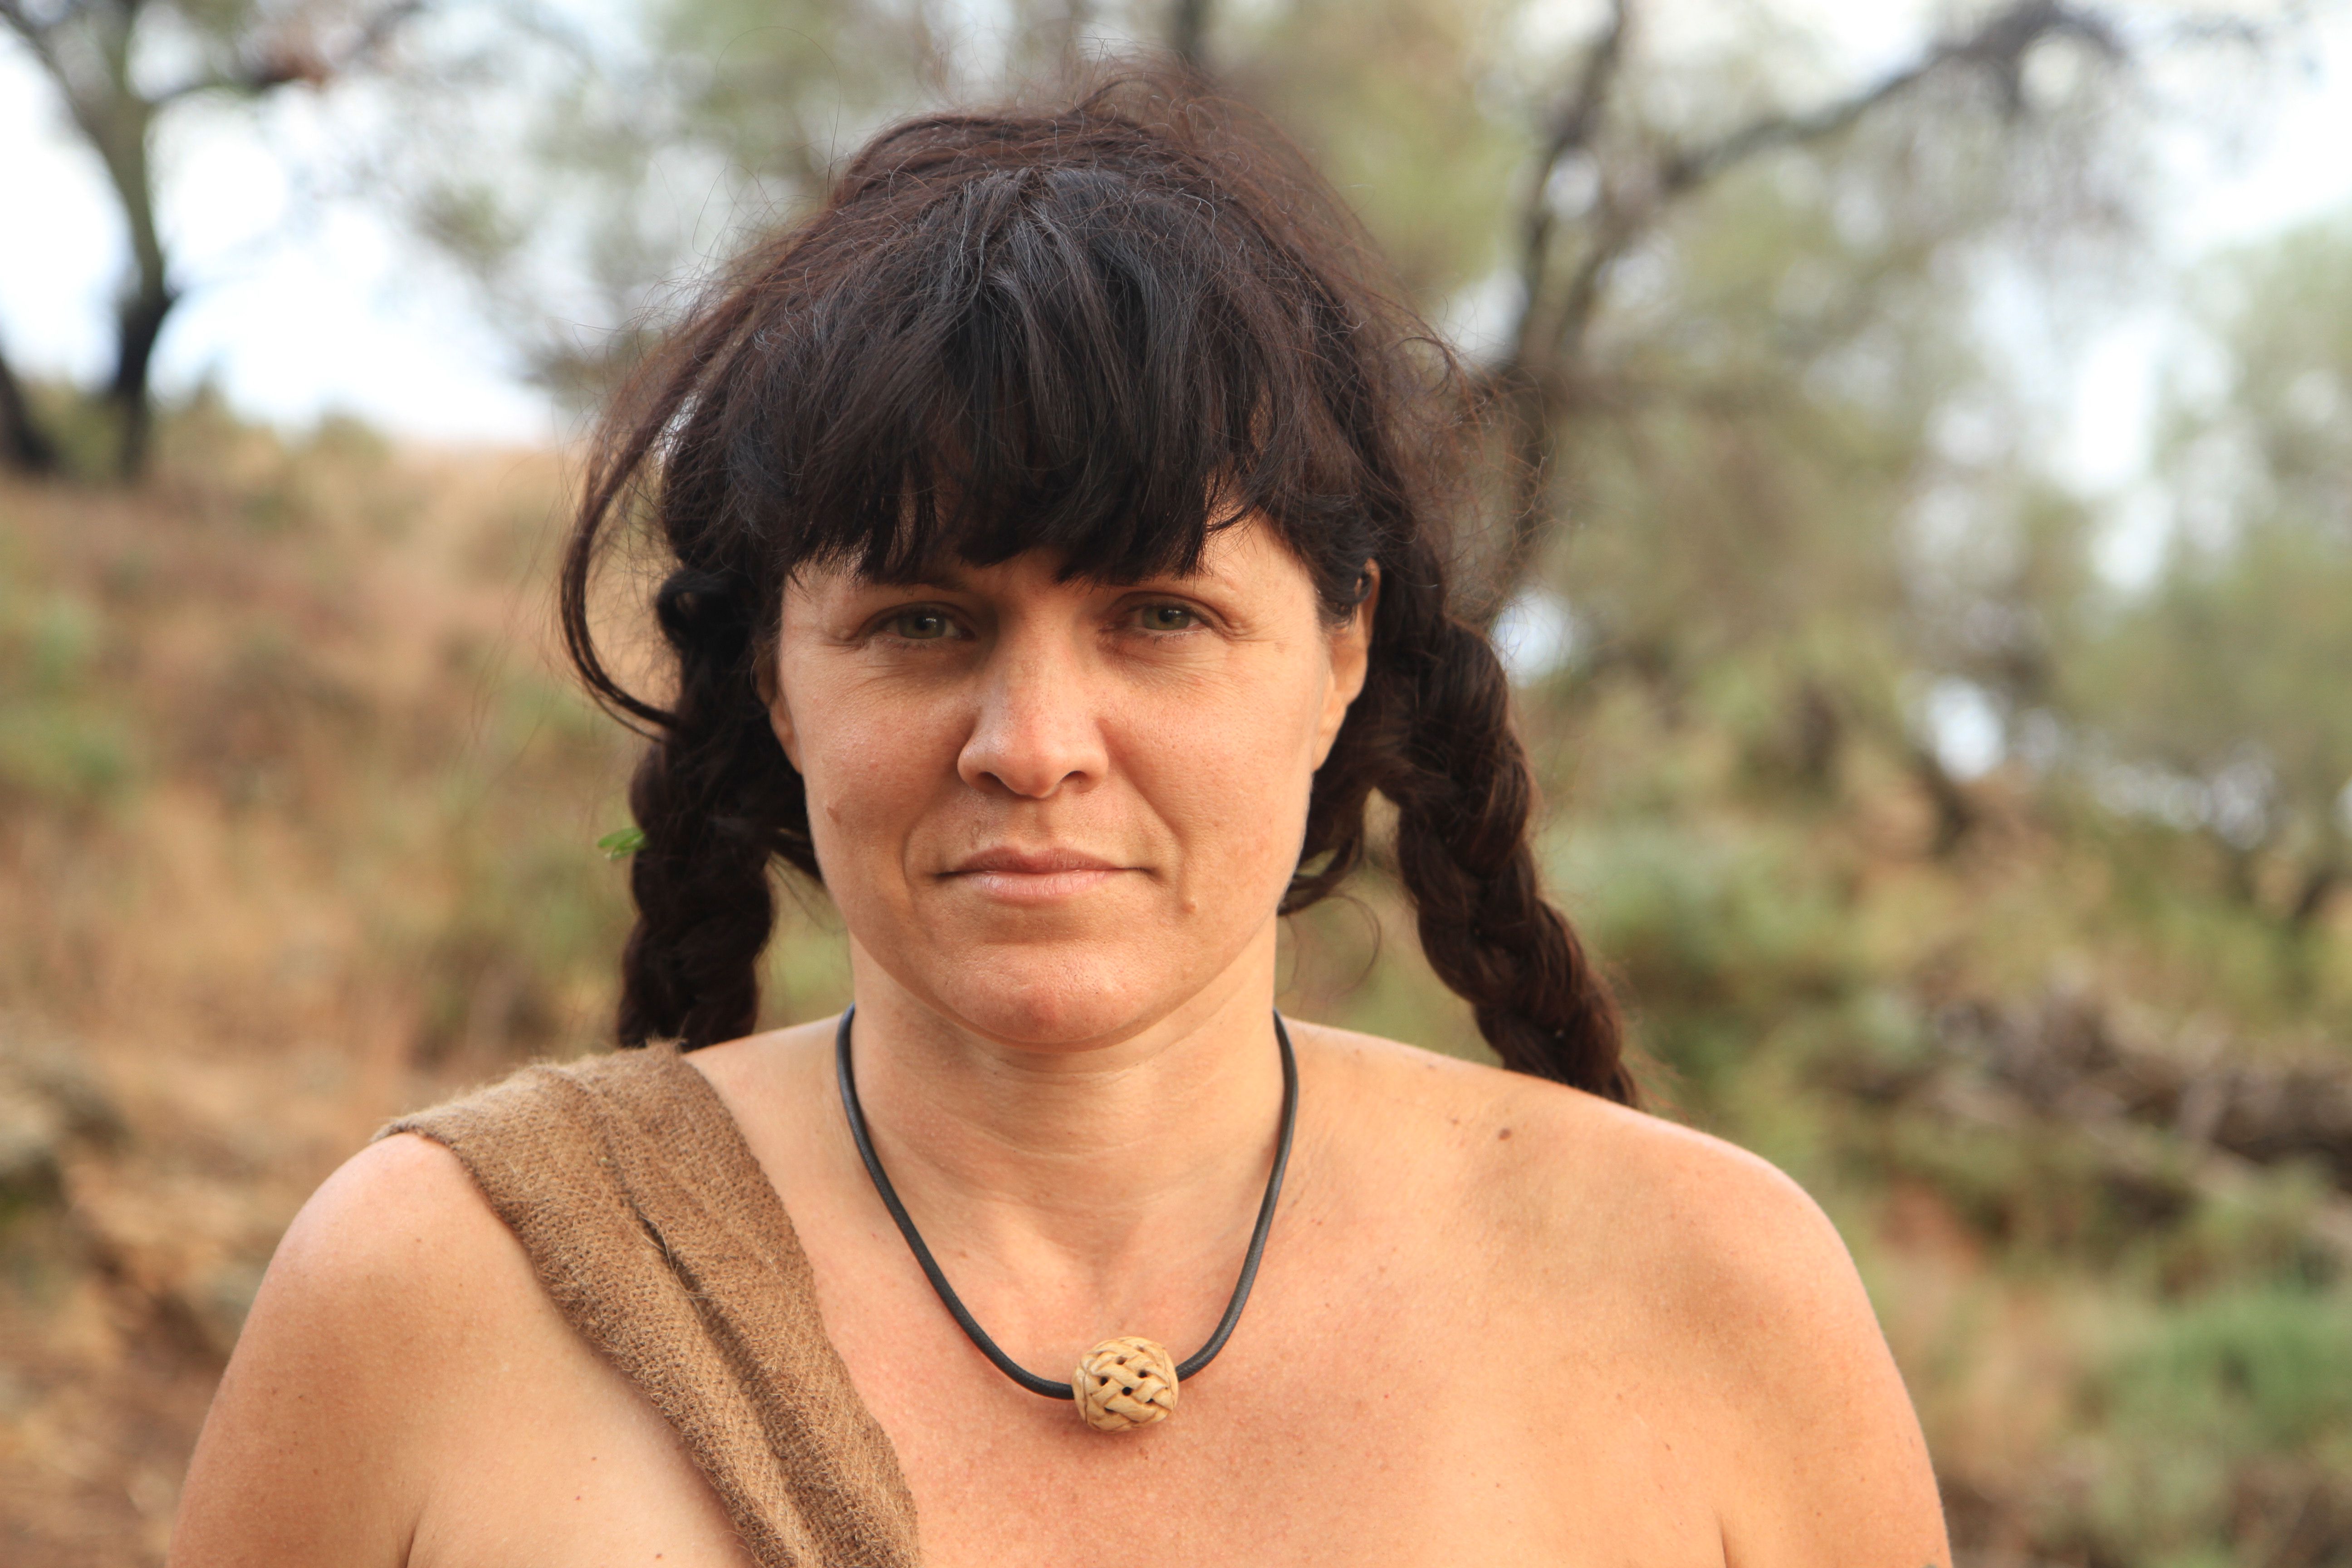 Controversial Texas contestant on 'Naked and Afraid' upset with